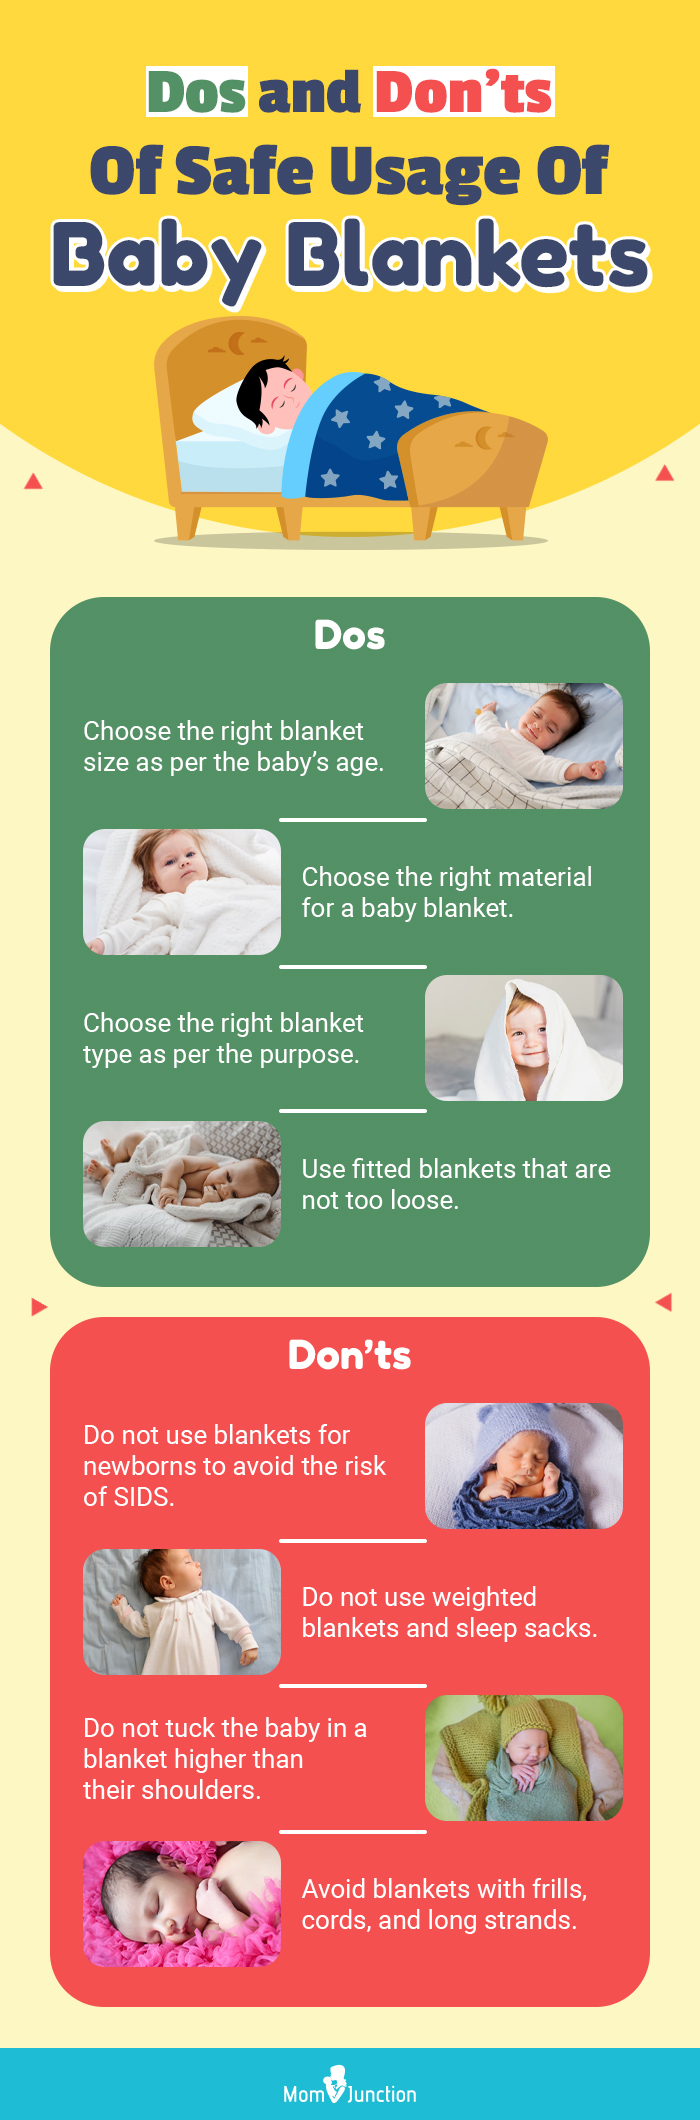 dos and don ts of safe usage of baby blankets (infographic)